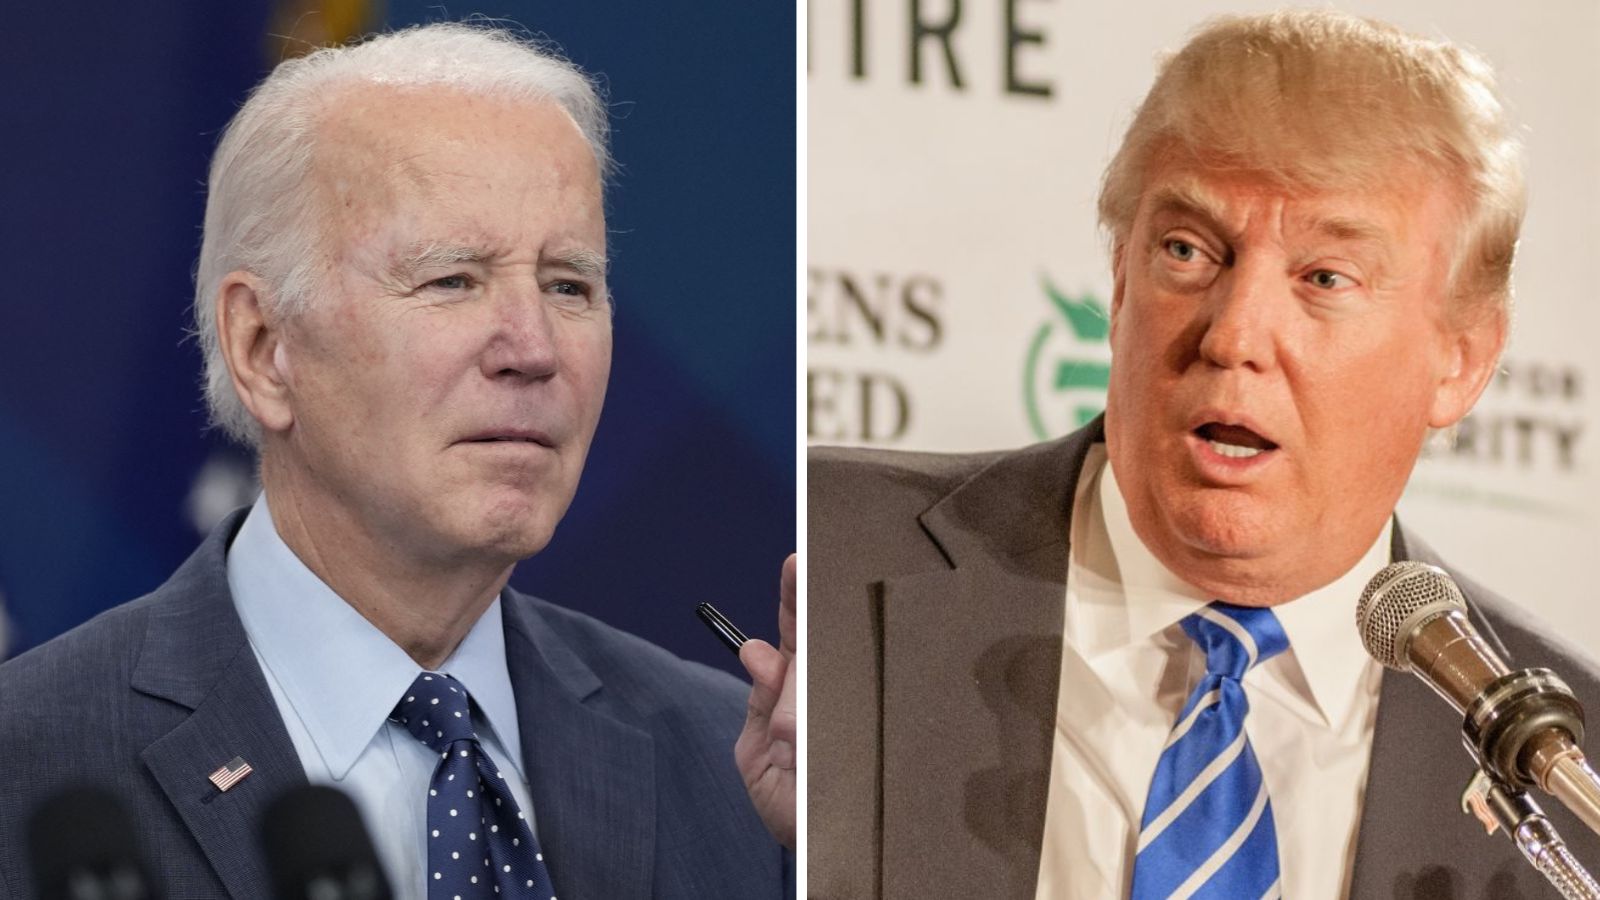 “Failed Promises, Student Loans, Foreign Policy in General.”: Poll Indicates Joe Biden Losing Ground to Donald Trump Among Young Voters